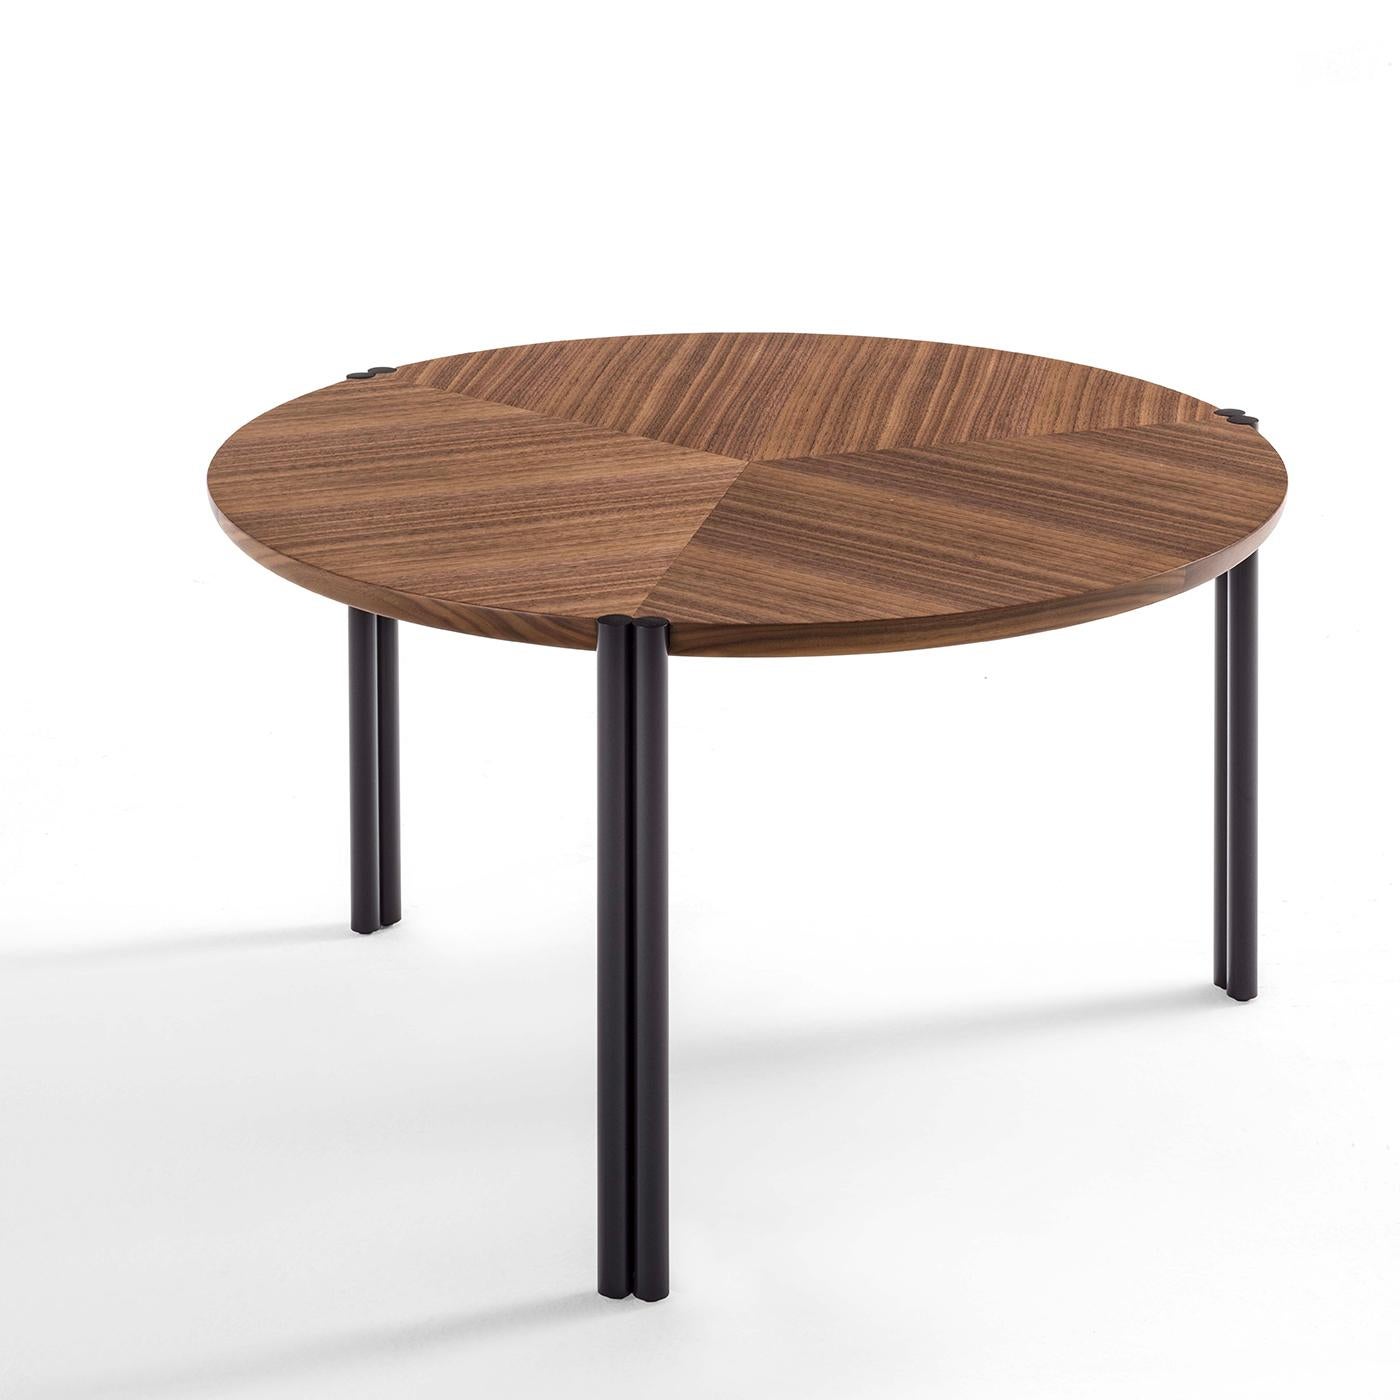 The round Jean Ordinary coffee table makes a stylish and functional addition to any living room or lounge area. Clean and elegant in design, the table perfectly suits any classic or modern decor. The legs are available in brass or iron lacquered in